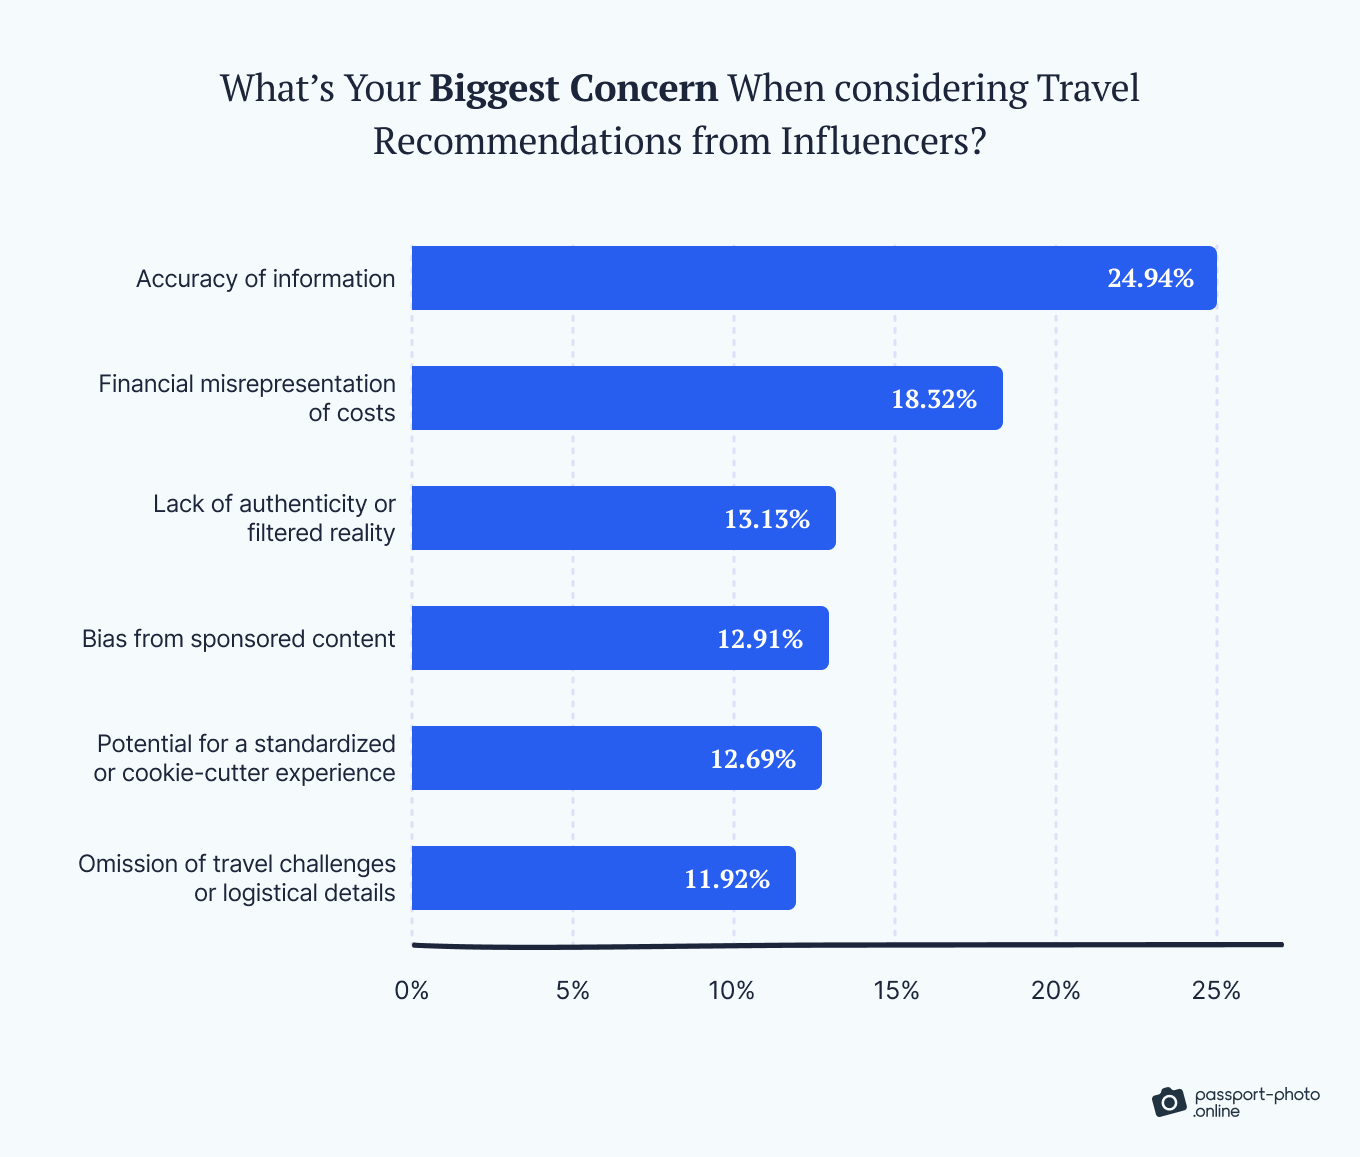 A ranking of the biggest concerns when considering travel recommendations from influencers on social media